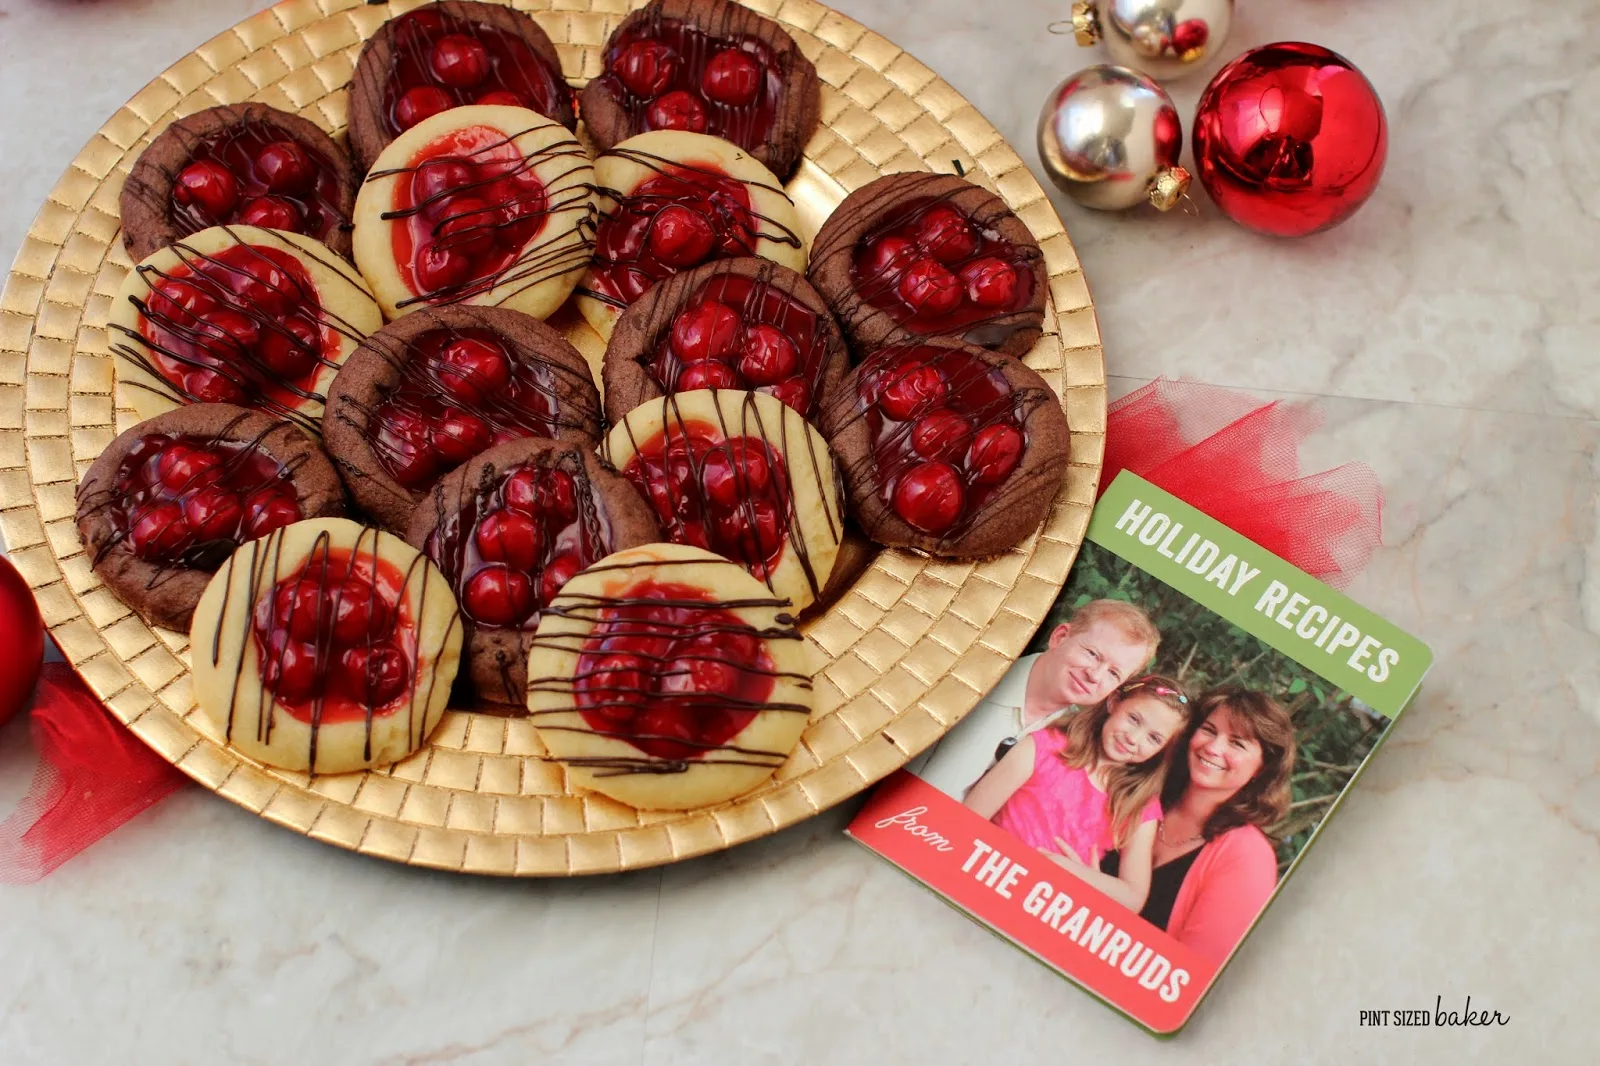 Enjoy the flavor of a cherry pie in these fun and easy Cherry Pie Thumbprint Cookies! You can also fill them with apple or blueberry to bake your favorite.